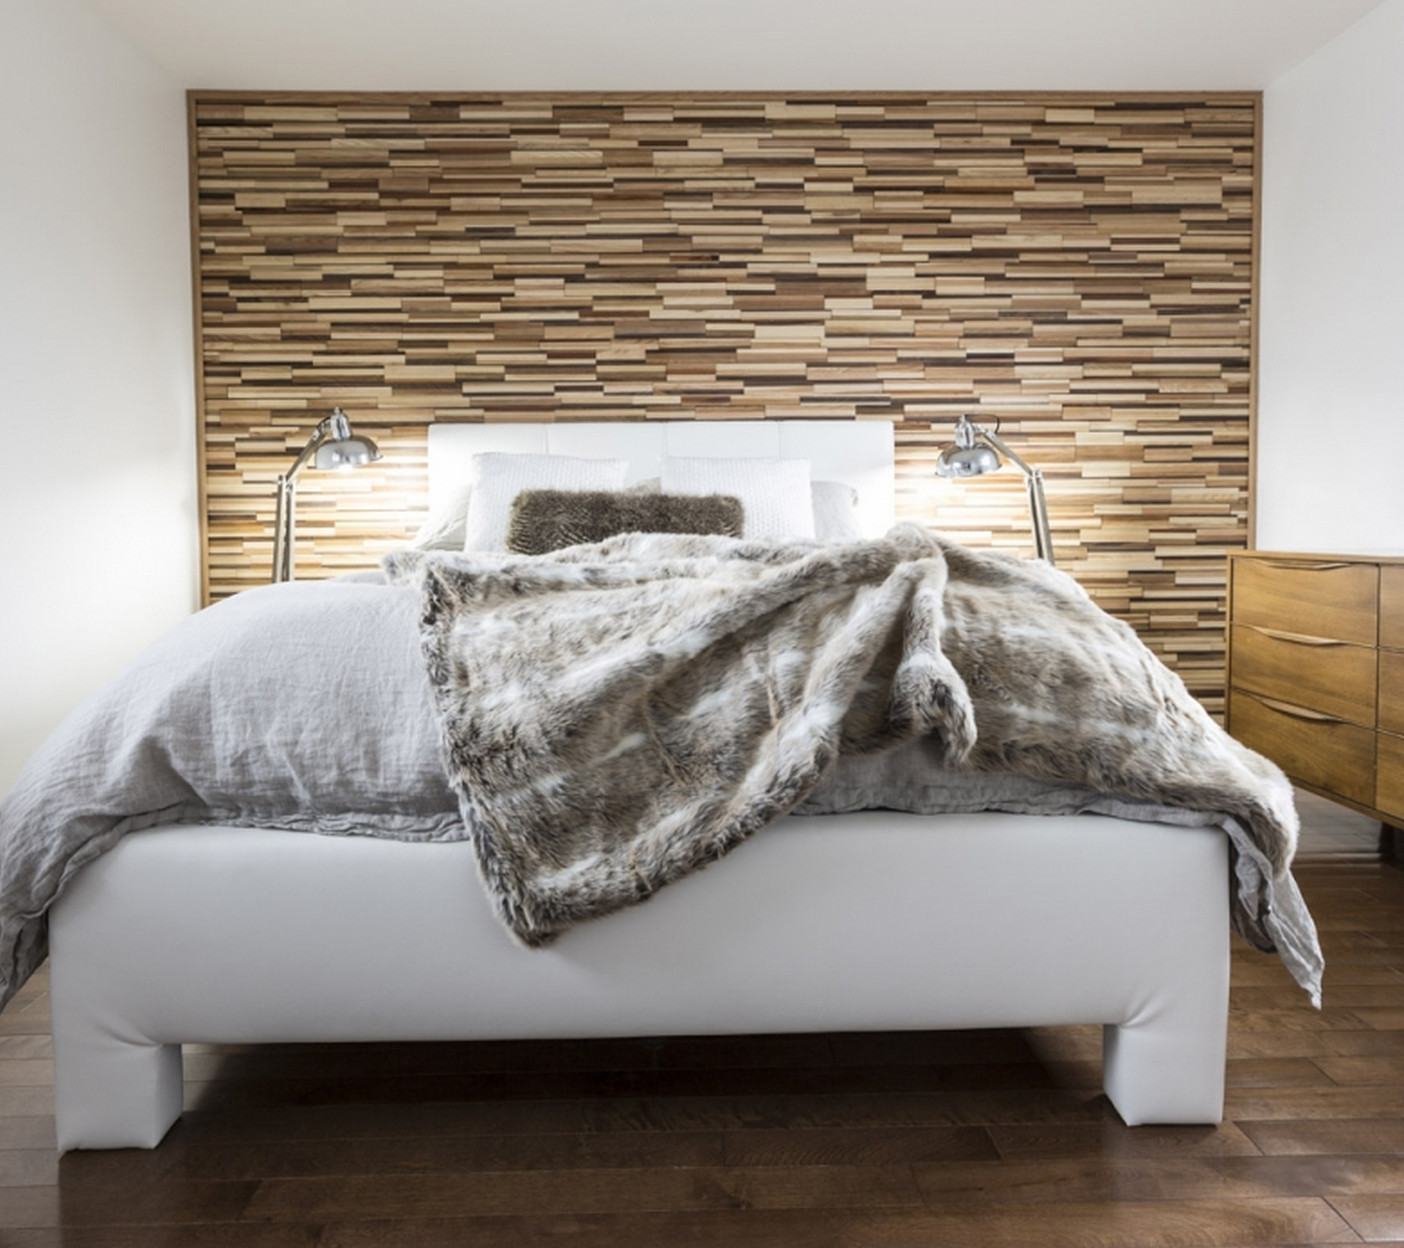 Wooden Wall Panels For Bedroom
 Add a warm contemporary look to any room with easy DIY